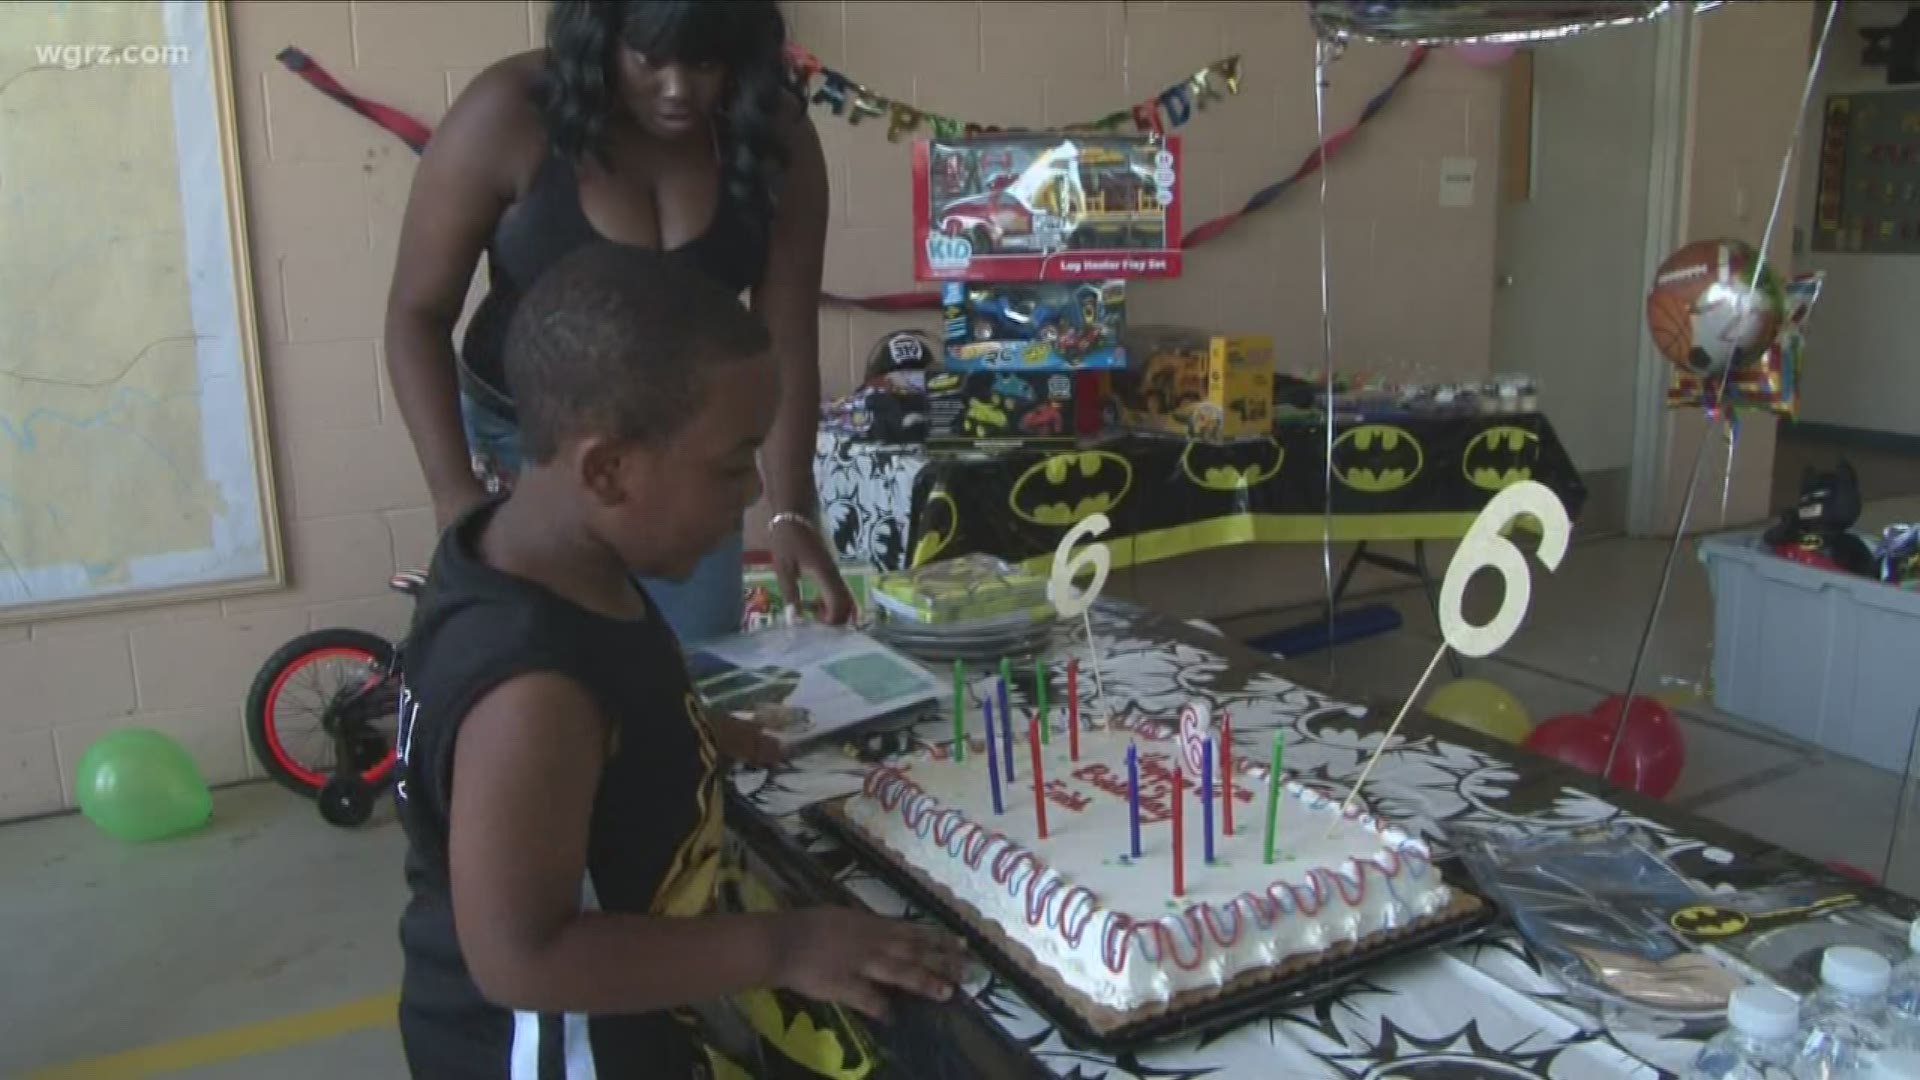 A Western New York family lost everything when flames destroyed their home but today there was much to celebrate for a six year old boy's birthday.